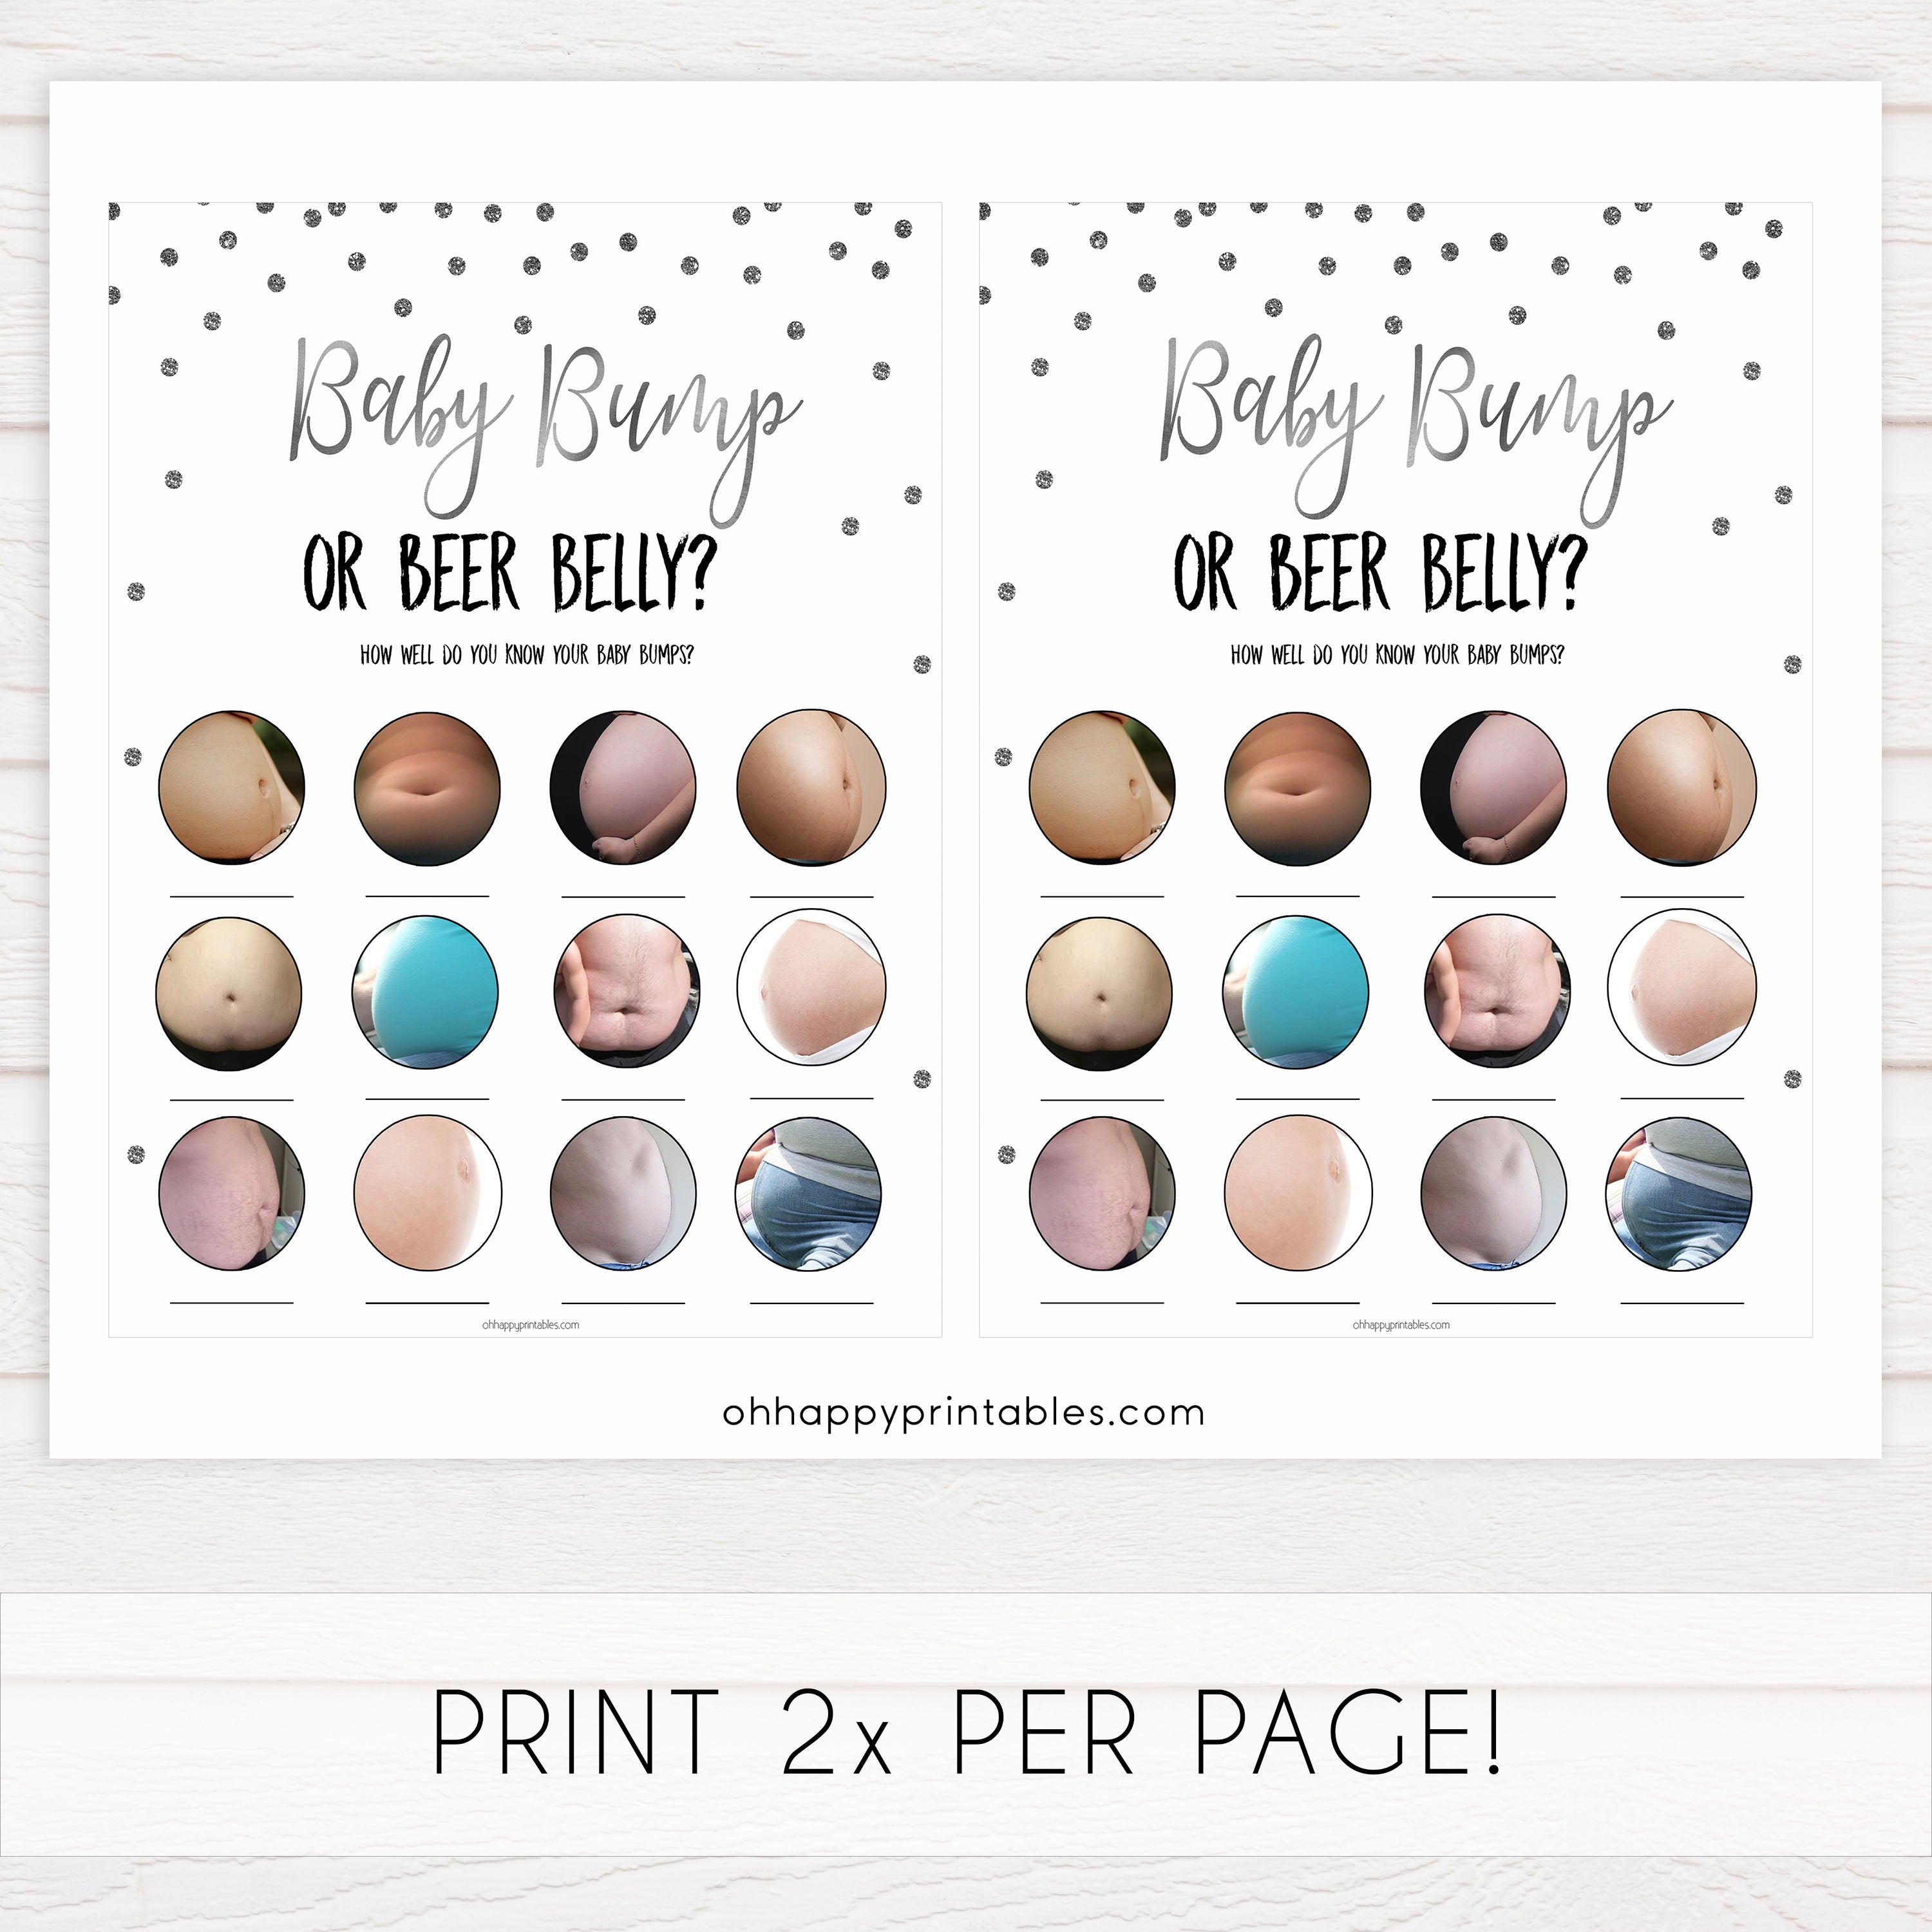 baby bump or beer belly game, Printable baby shower games, baby silver glitter fun baby games, baby shower games, fun baby shower ideas, top baby shower ideas, silver glitter shower baby shower, friends baby shower ideas